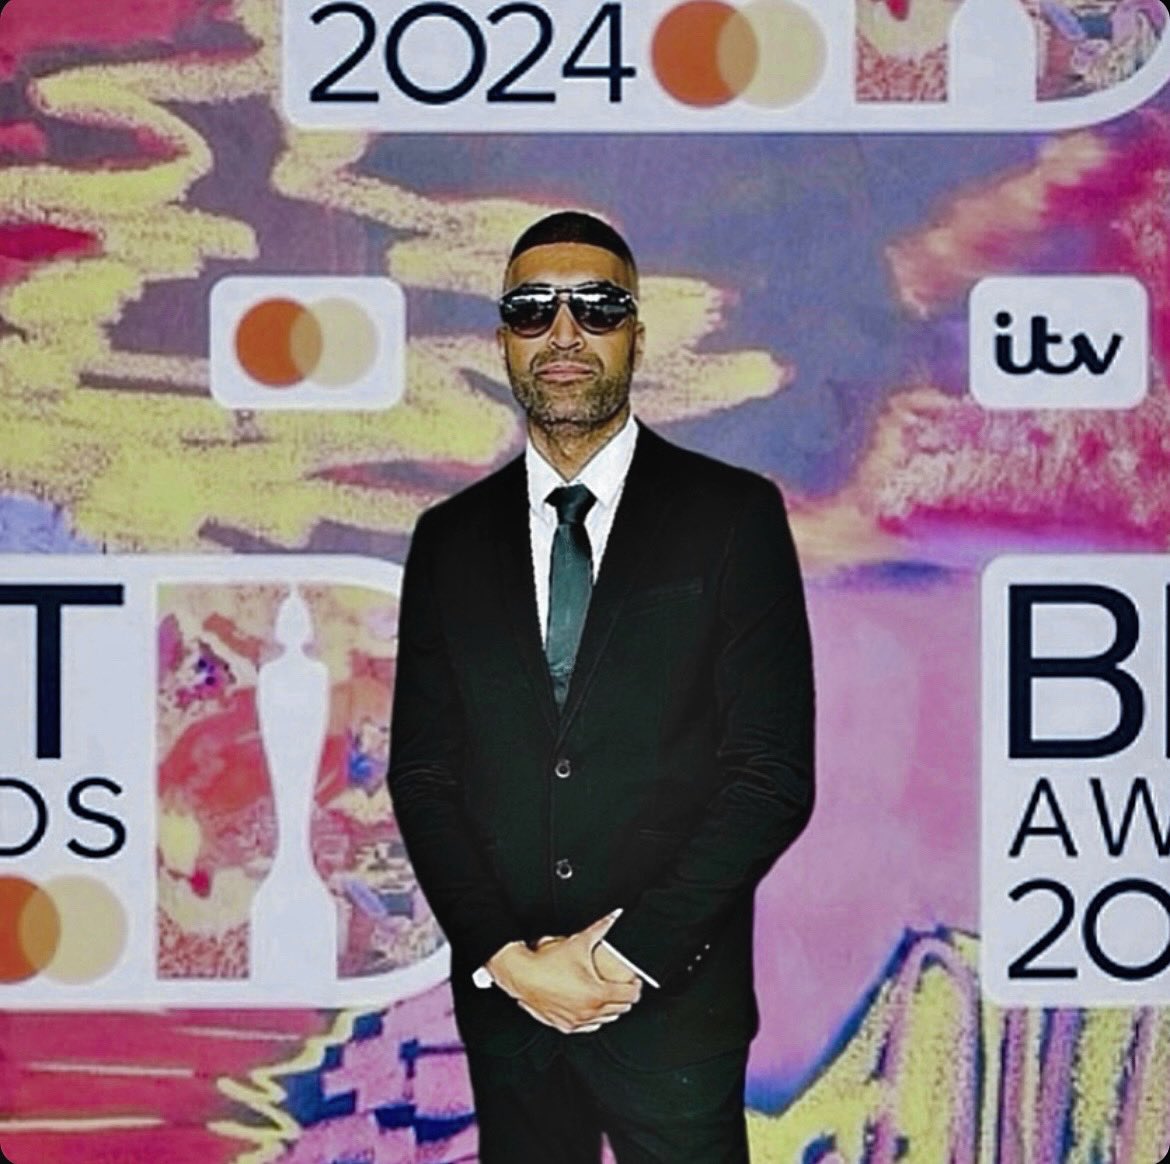 Thanks for having me @BRITs 🫶🏼💥 What a event! Thanks for all the love and vibes 🥂 📸📸📸 - VIP tings. Turn up boss mode 🕶️ People’s ICON 🤙🏼 Ps @kylieminogue wins the evening for me 💥👑🔥 #BritaAwards #RedCarpet #Papped #VIP #Winning